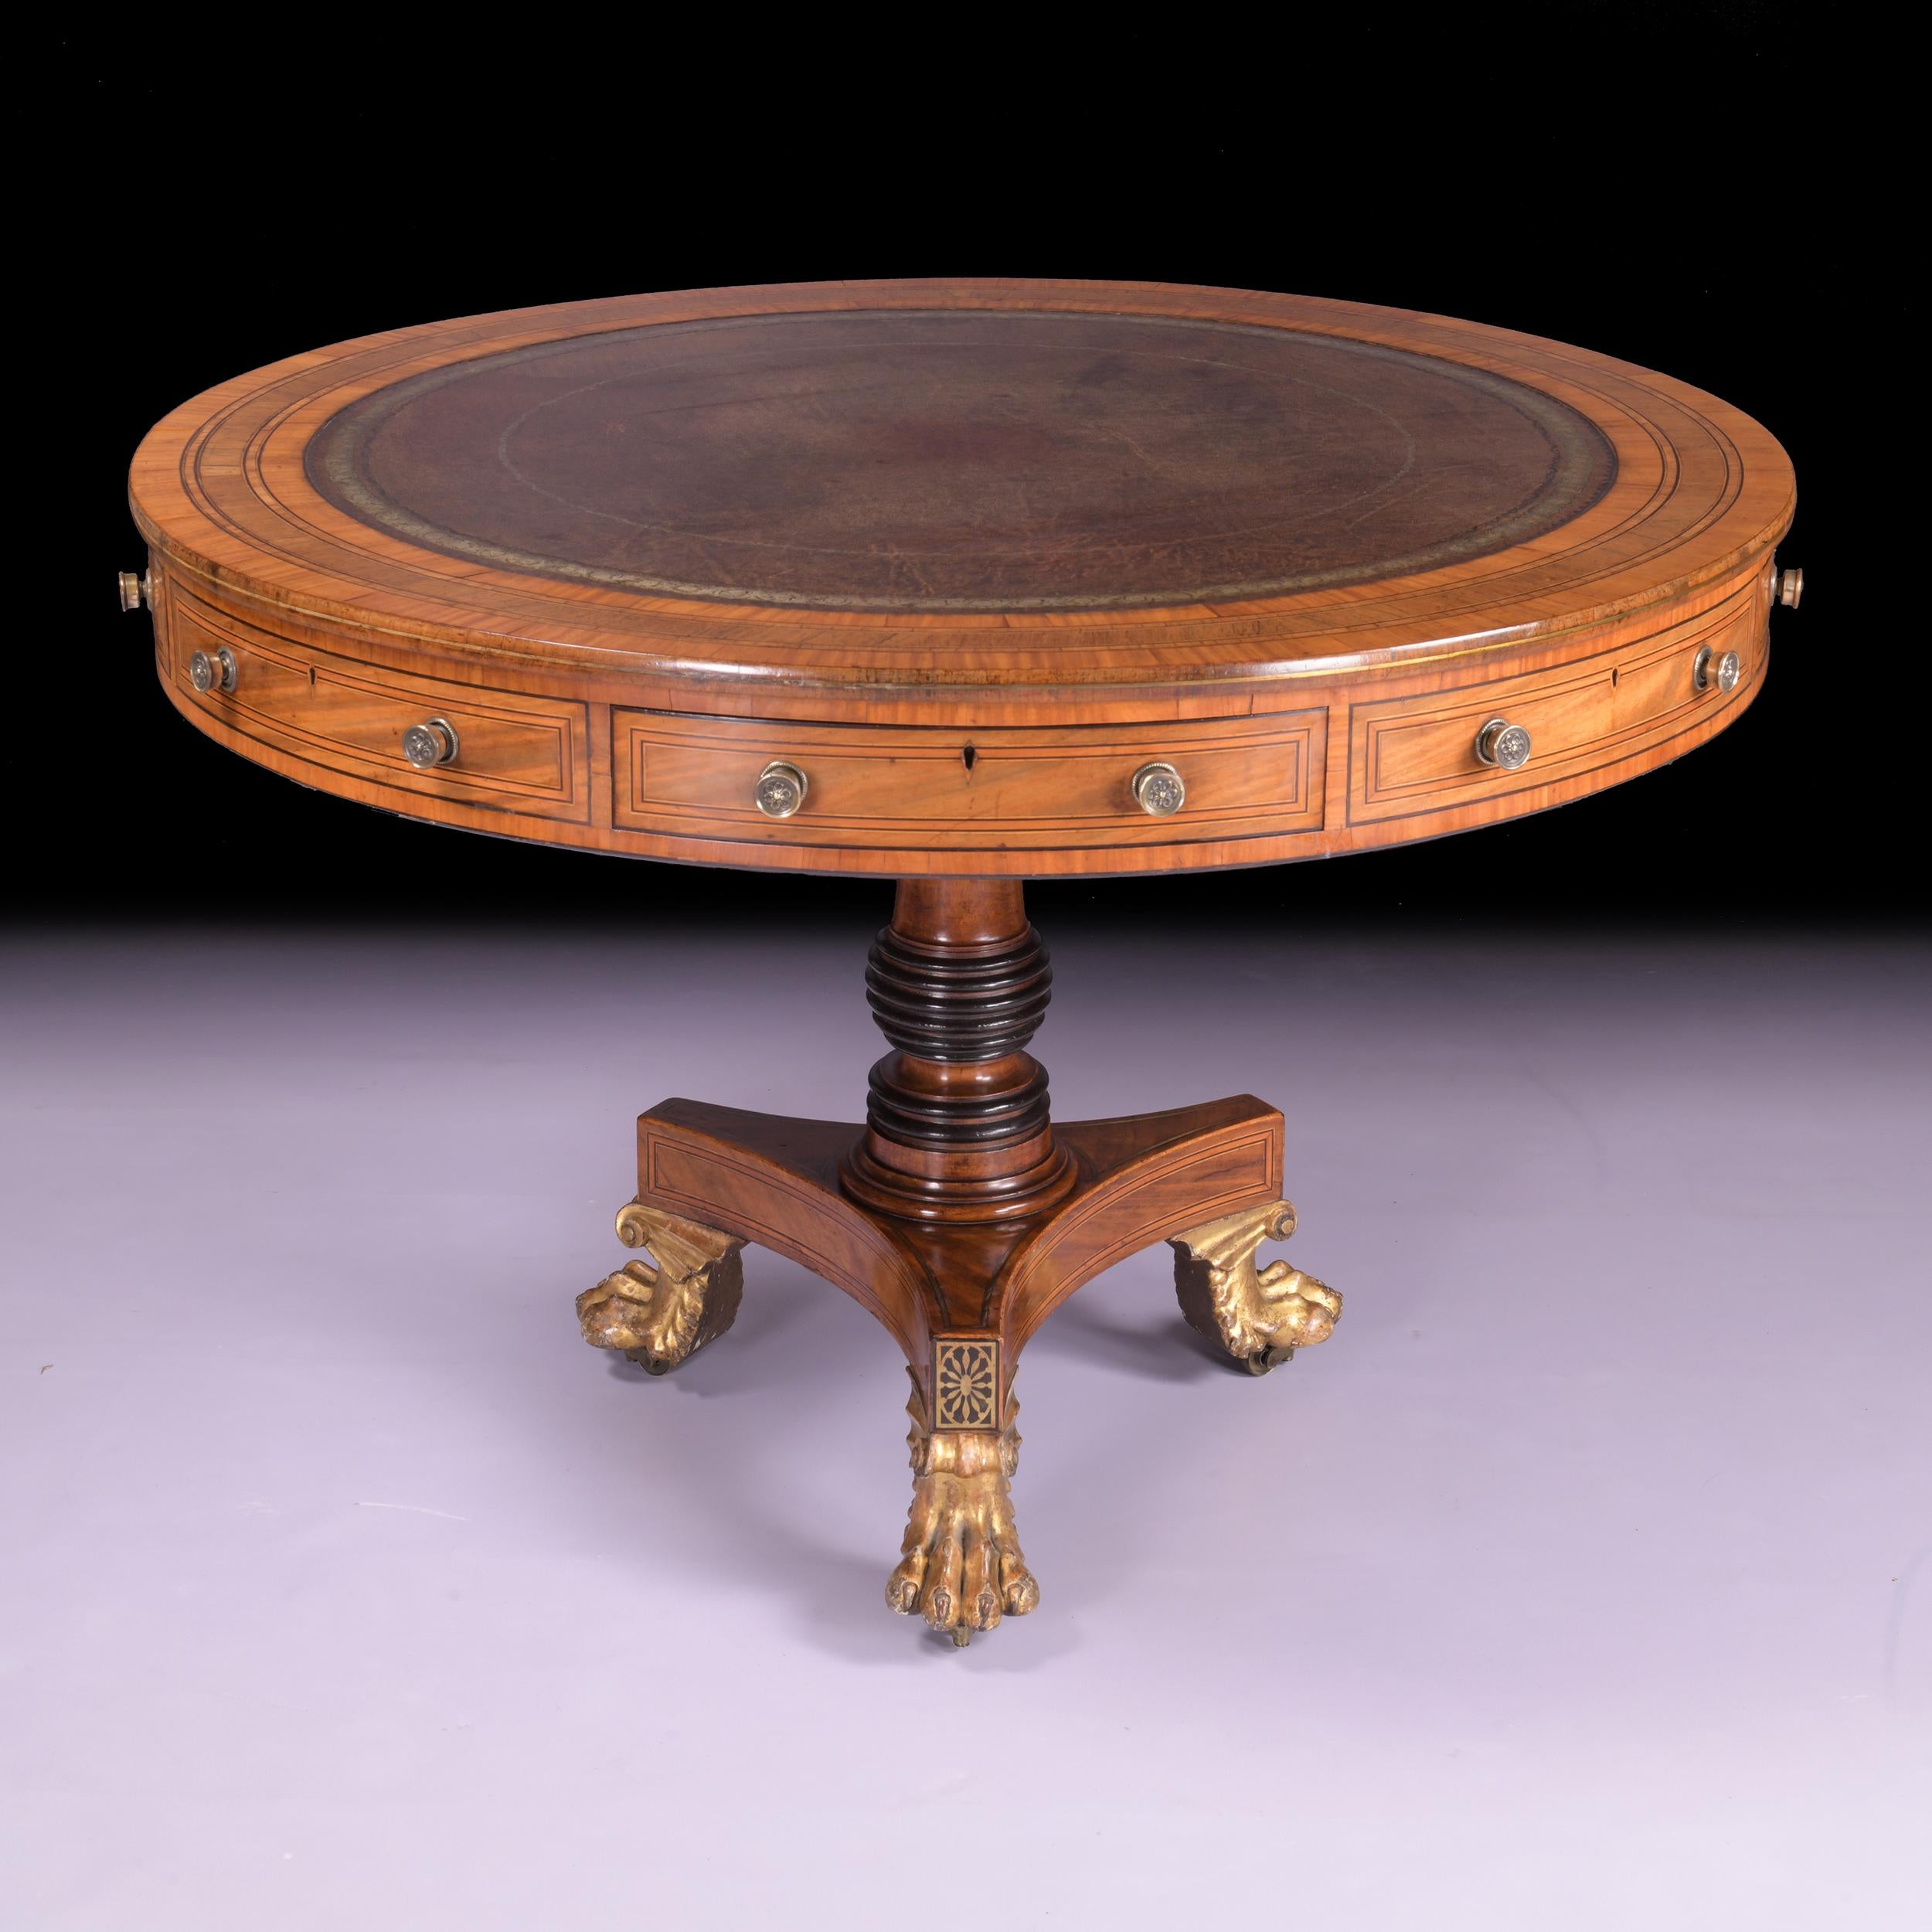 An exceptional early Regency Satinwood and line inlaid revolving drum/centre table, with a gilt-decorated brown leather-lined top above four frieze drawers and four dummy drawers, on a column support, on a concave-sided triform platform, with gilt